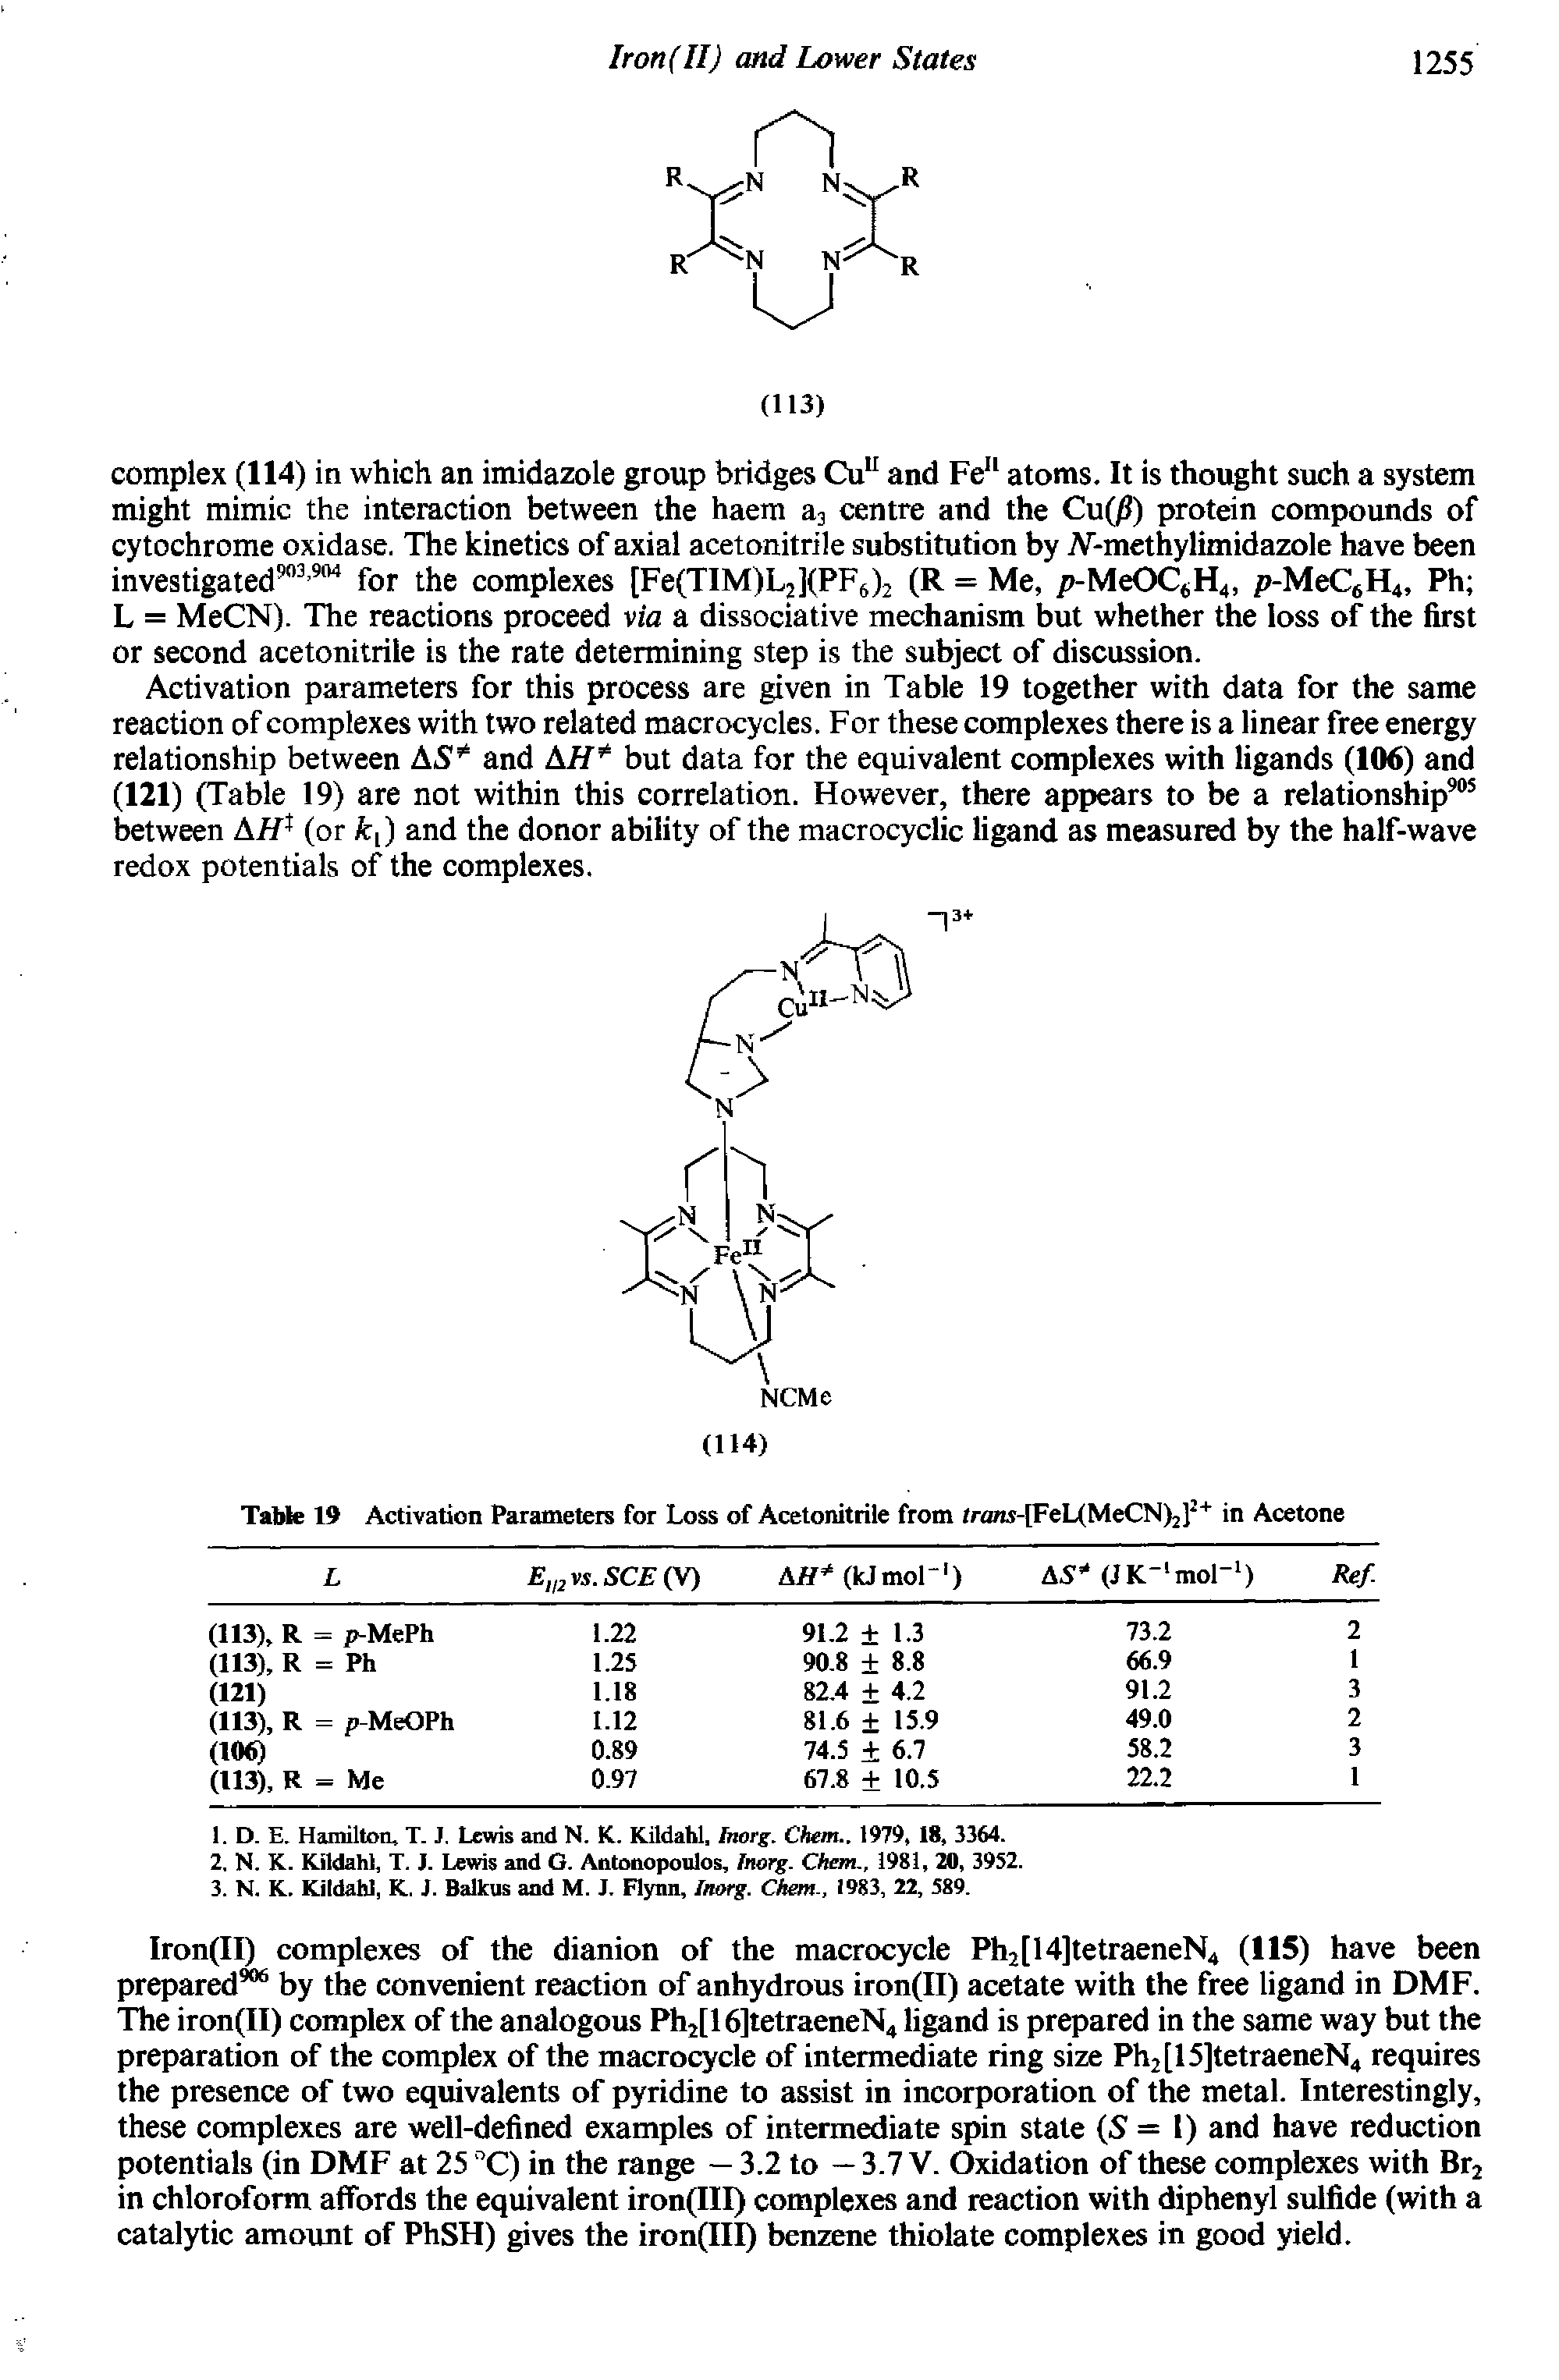 Table 19 Activation Parameters for Loss of Acetonitrile from fra/ts-[FeL(MeCN)2]2+ in Acetone...